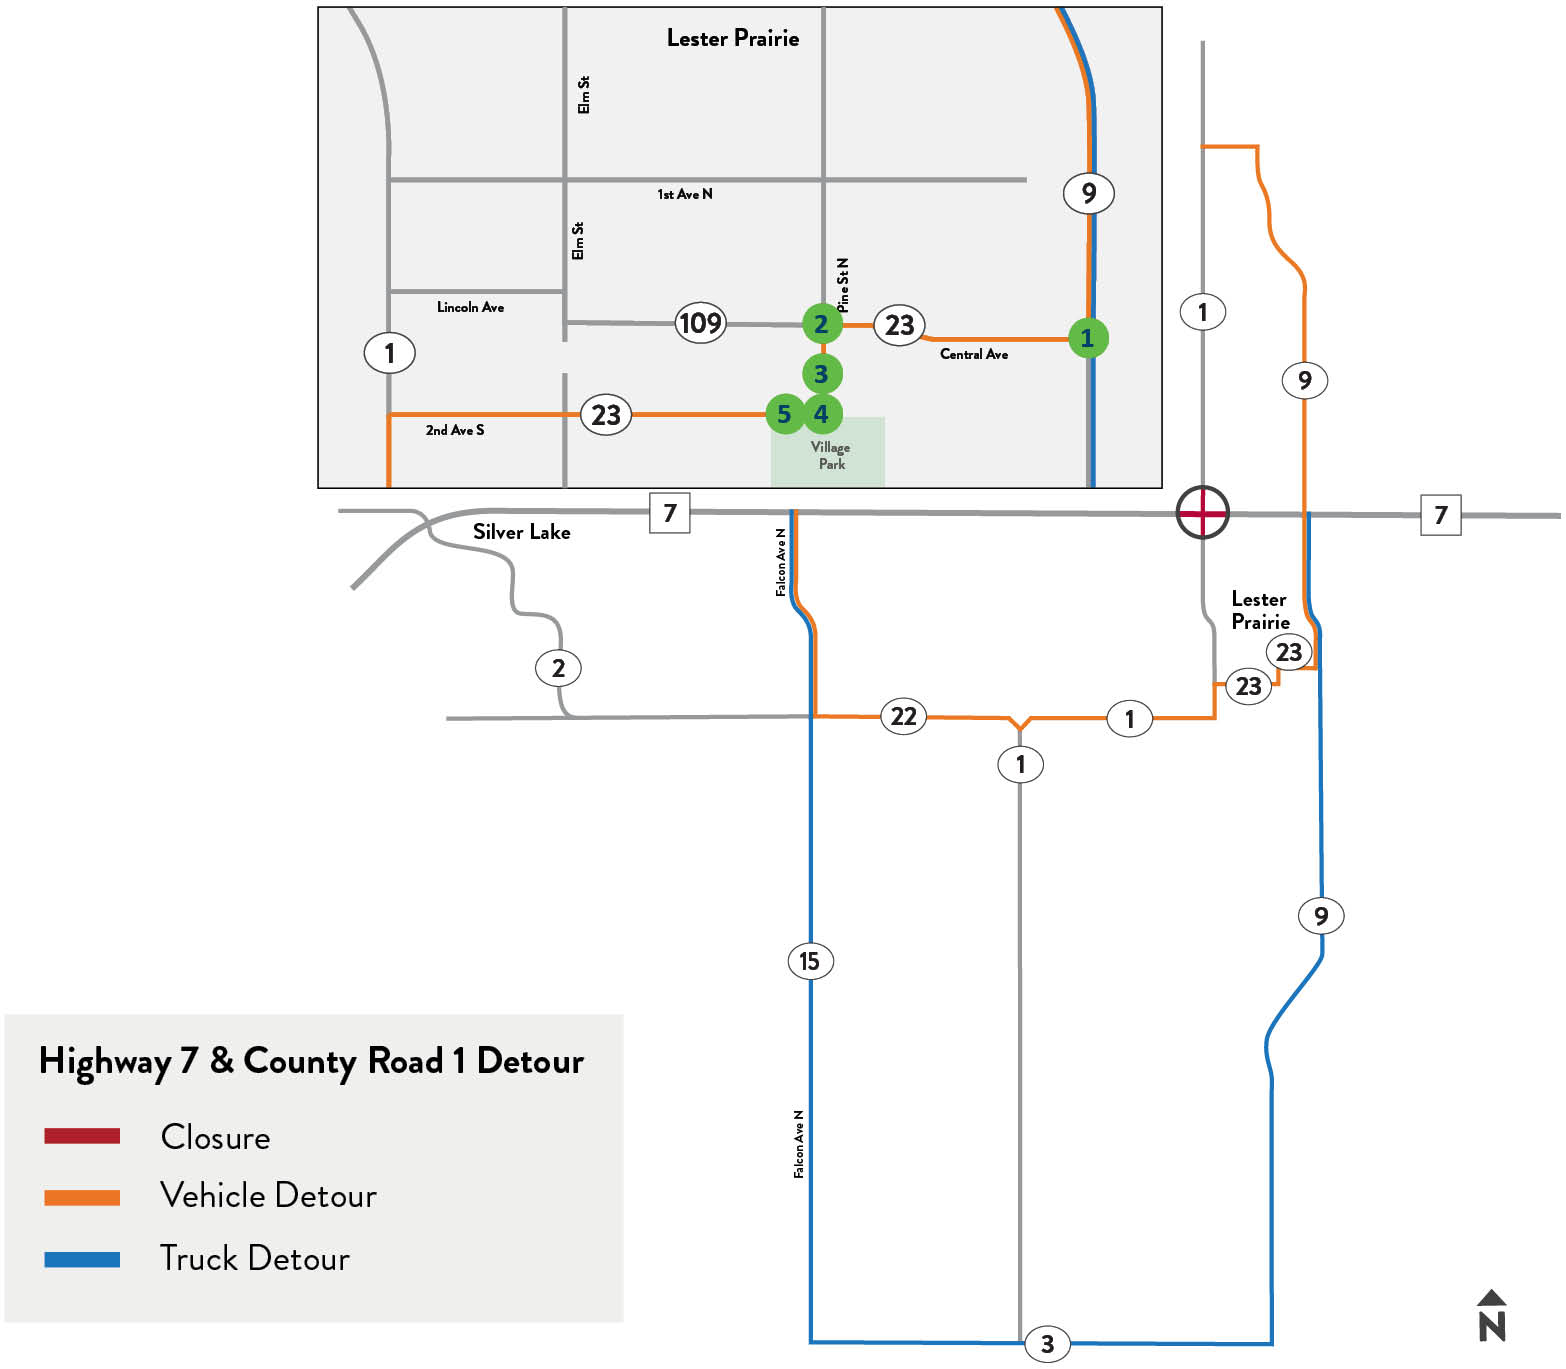 Map of intersection of Hwy 7 and CR 1 near Lester Prairie